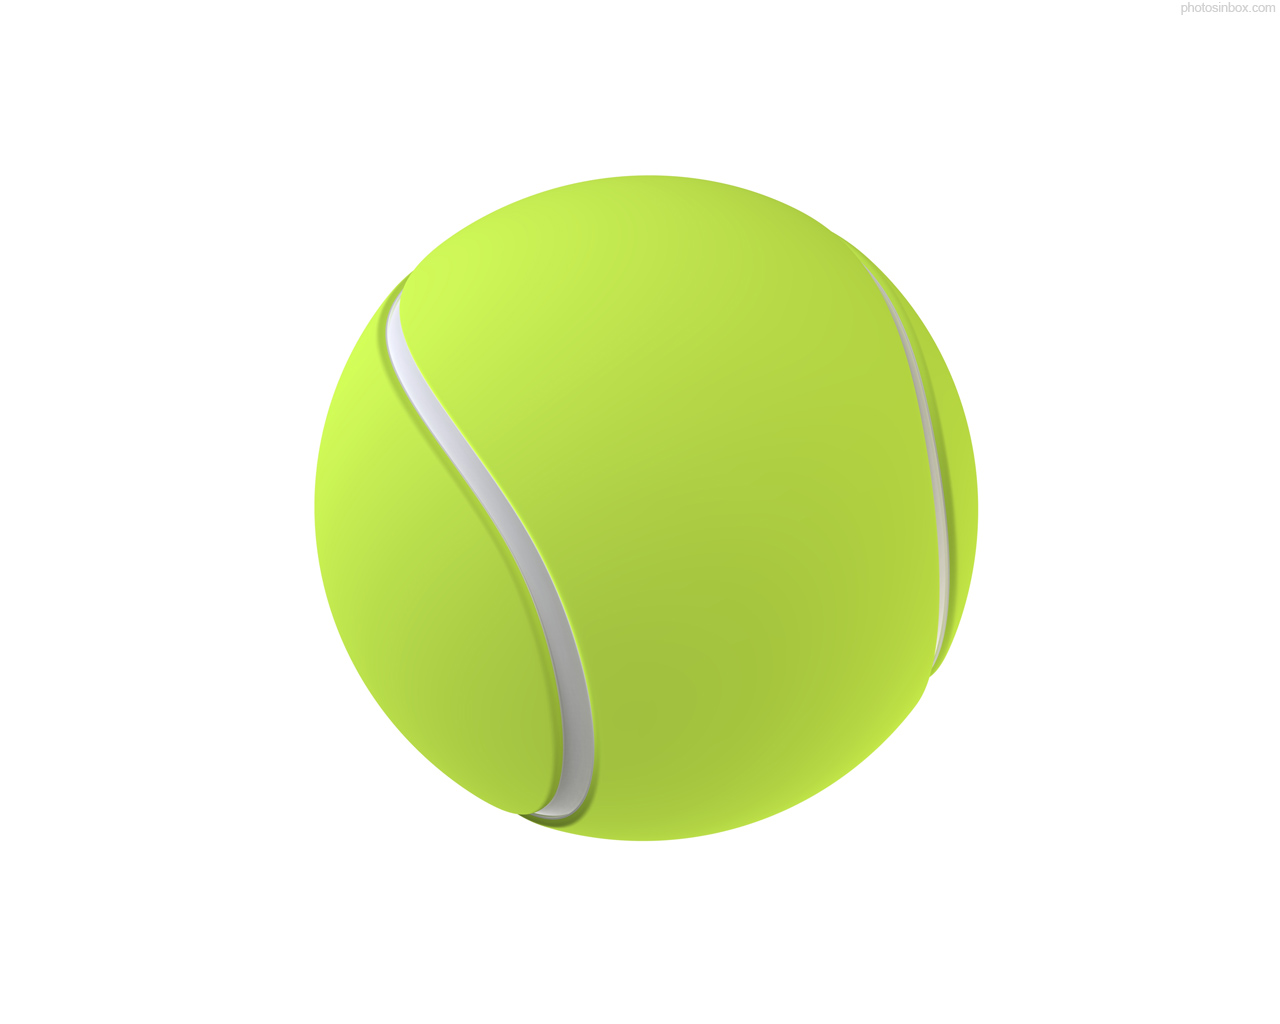 Isolated Tennis Ball | Free Images - vector clip art ...